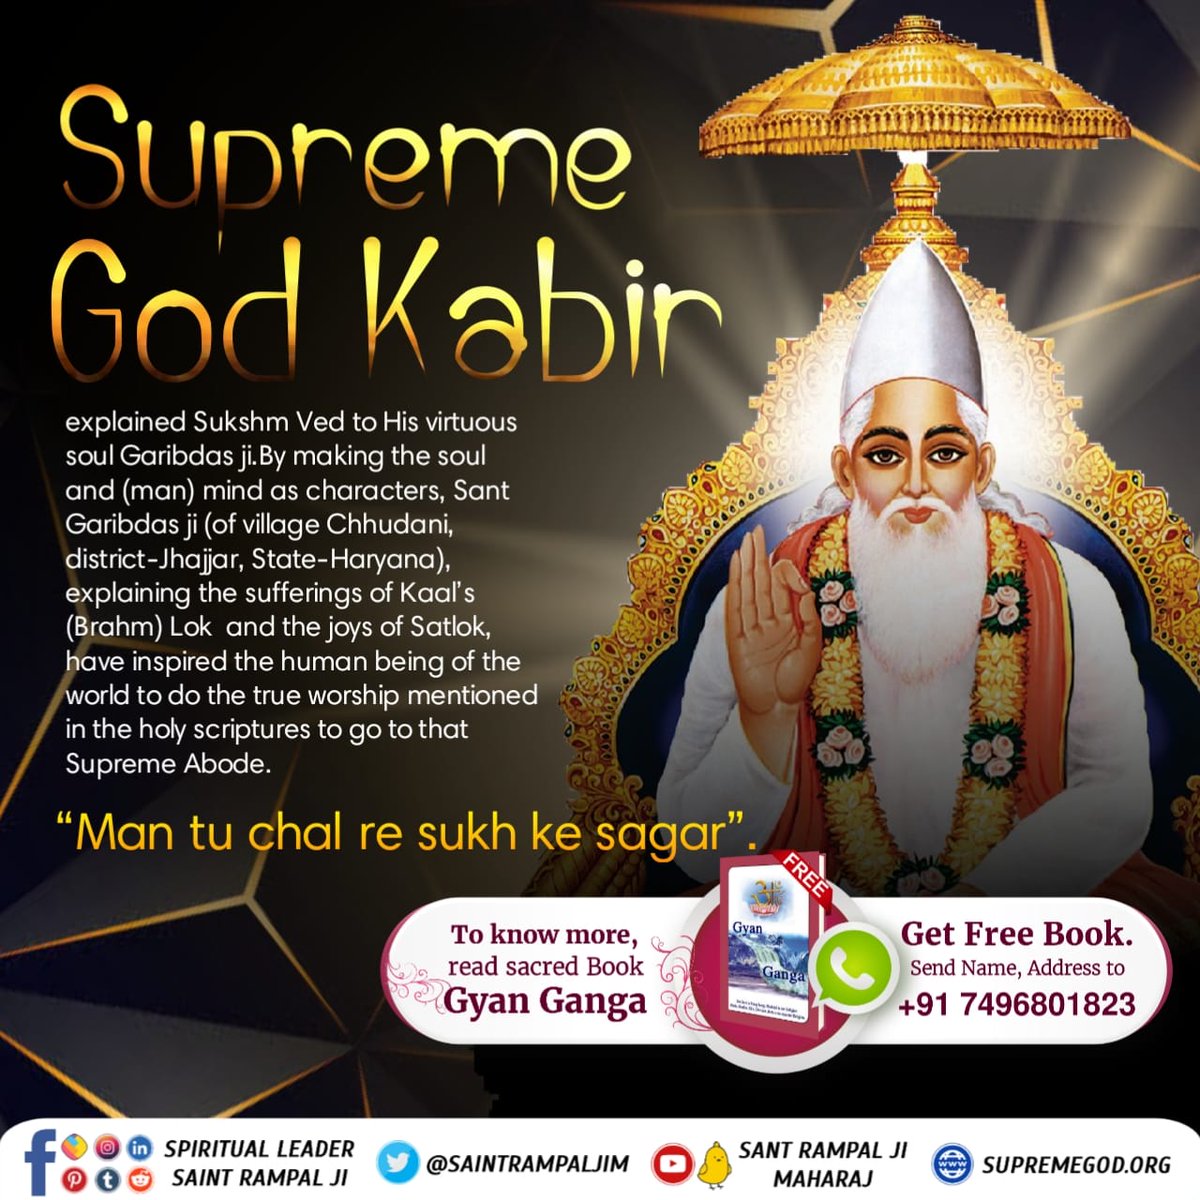 Do you know that the Supreme God comes in all the four yug's, good souls meet him.
“In Satyuga came by the name Satyasukrit, in Treta by the name Munindra, in Dwapar by the name Karunamay and in Kalyug by the name 'God Kabir'
#GodKabir_Comes_In_All_4Yugas